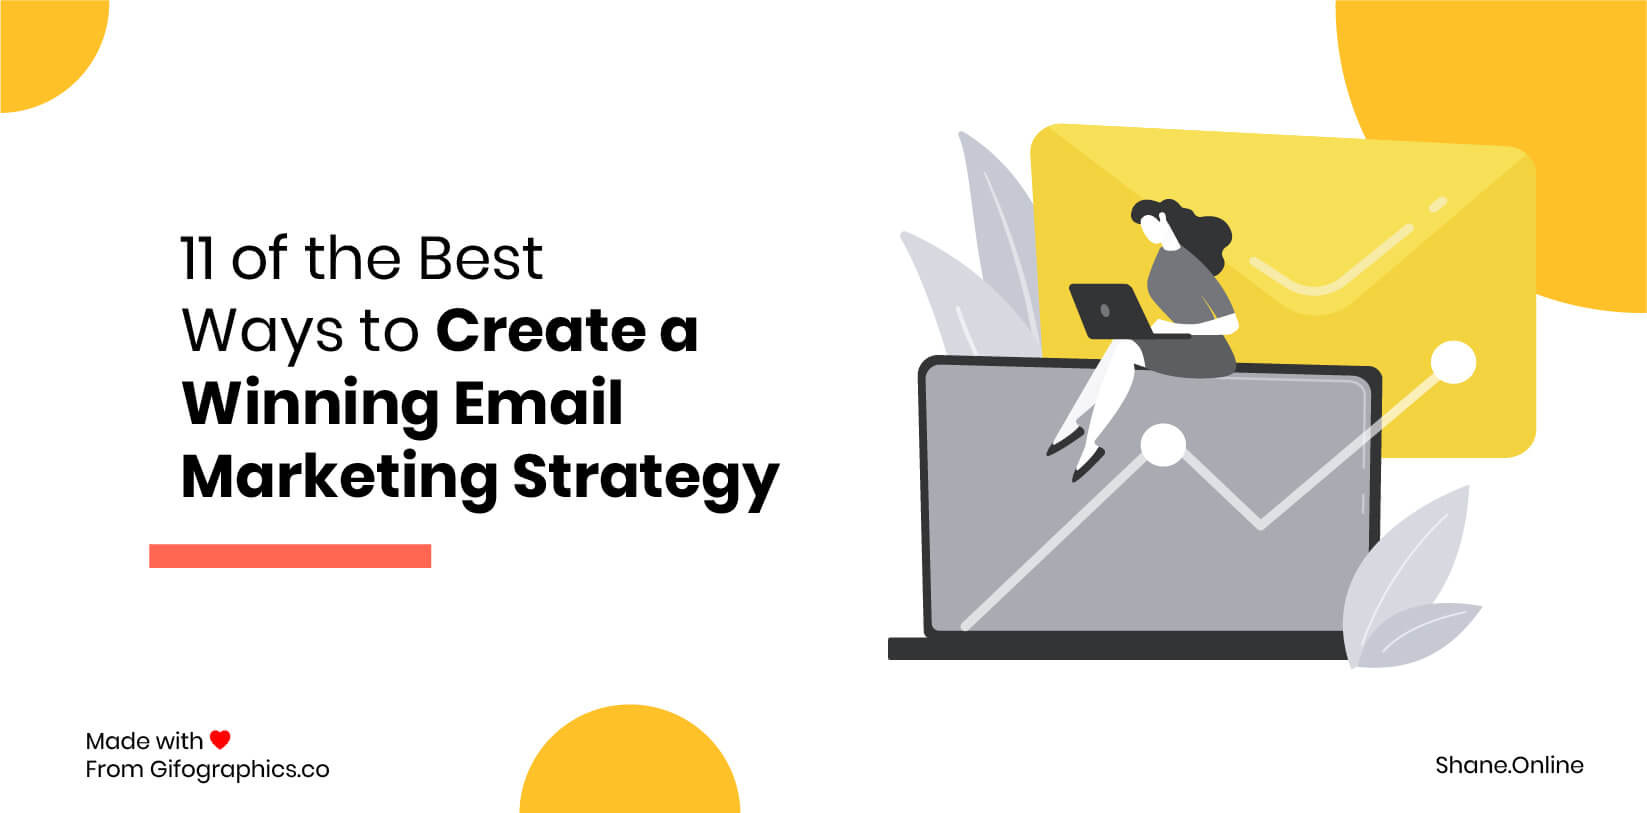 11 of the Best Ways to Create a Winning Email Marketing Strategy